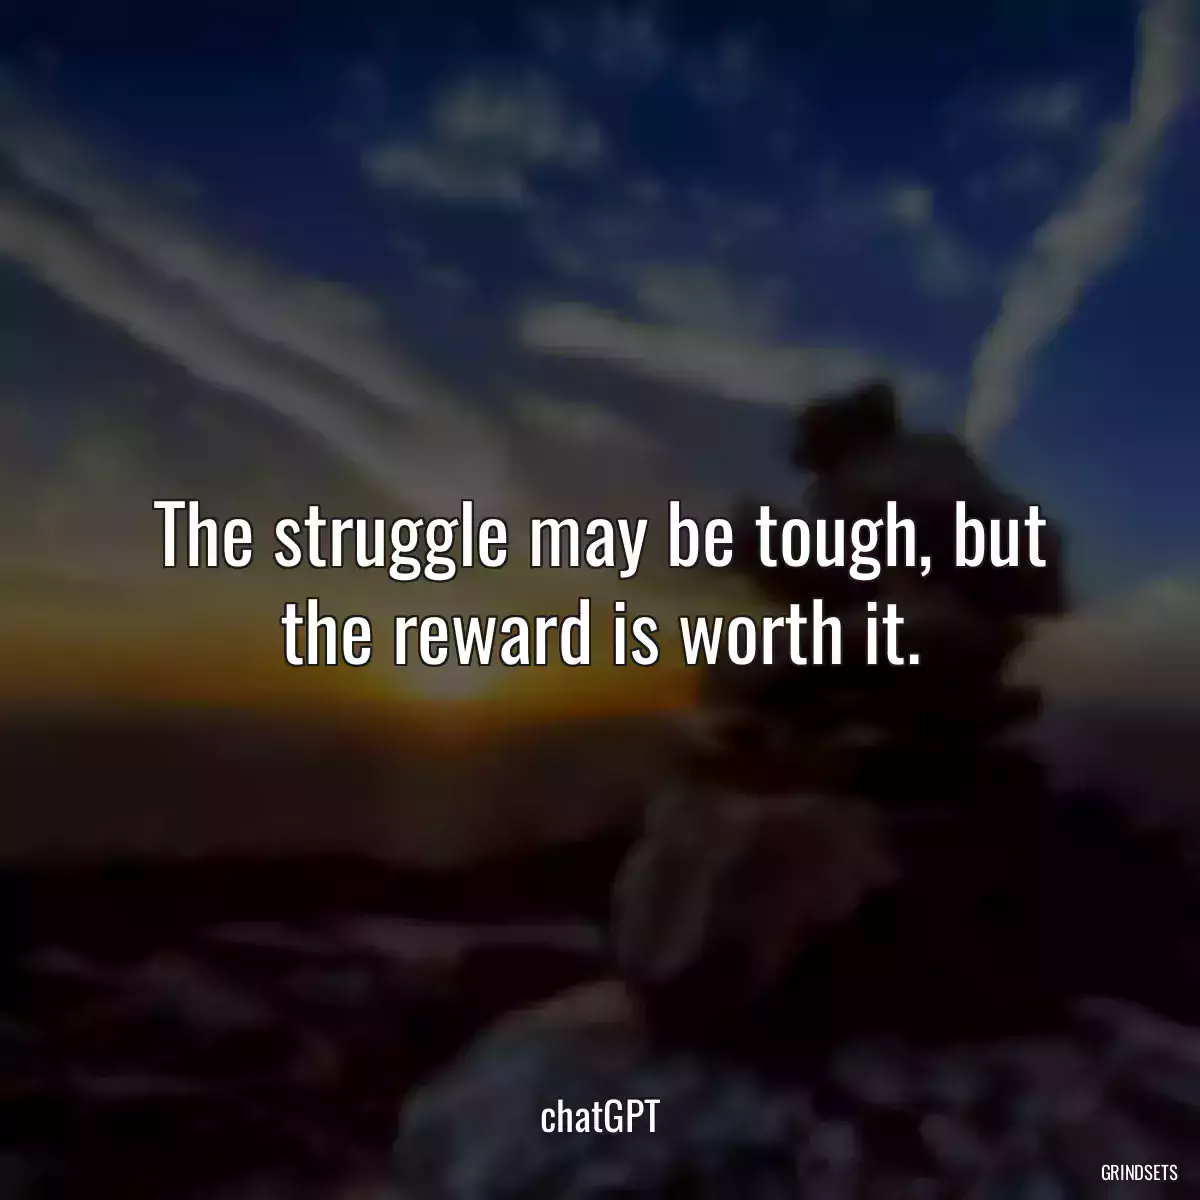 The struggle may be tough, but the reward is worth it.